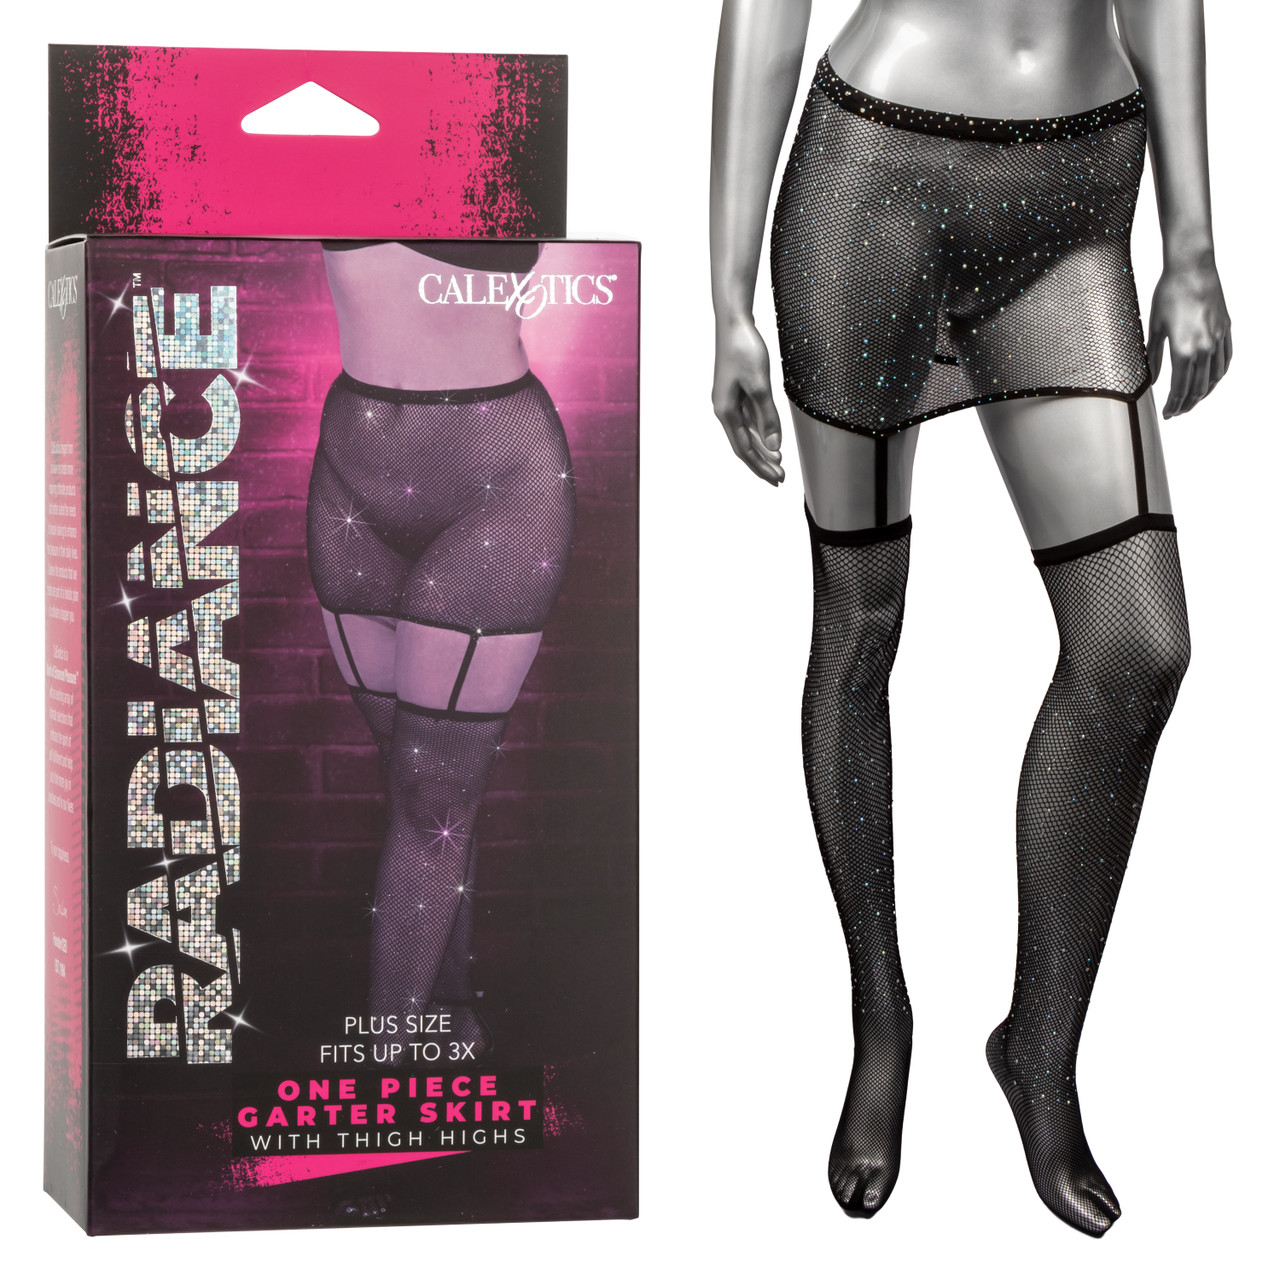 RADIANCE PLUS SIZE 1PC GARTER SKIRT W/ THIGH HIGHS - Click Image to Close